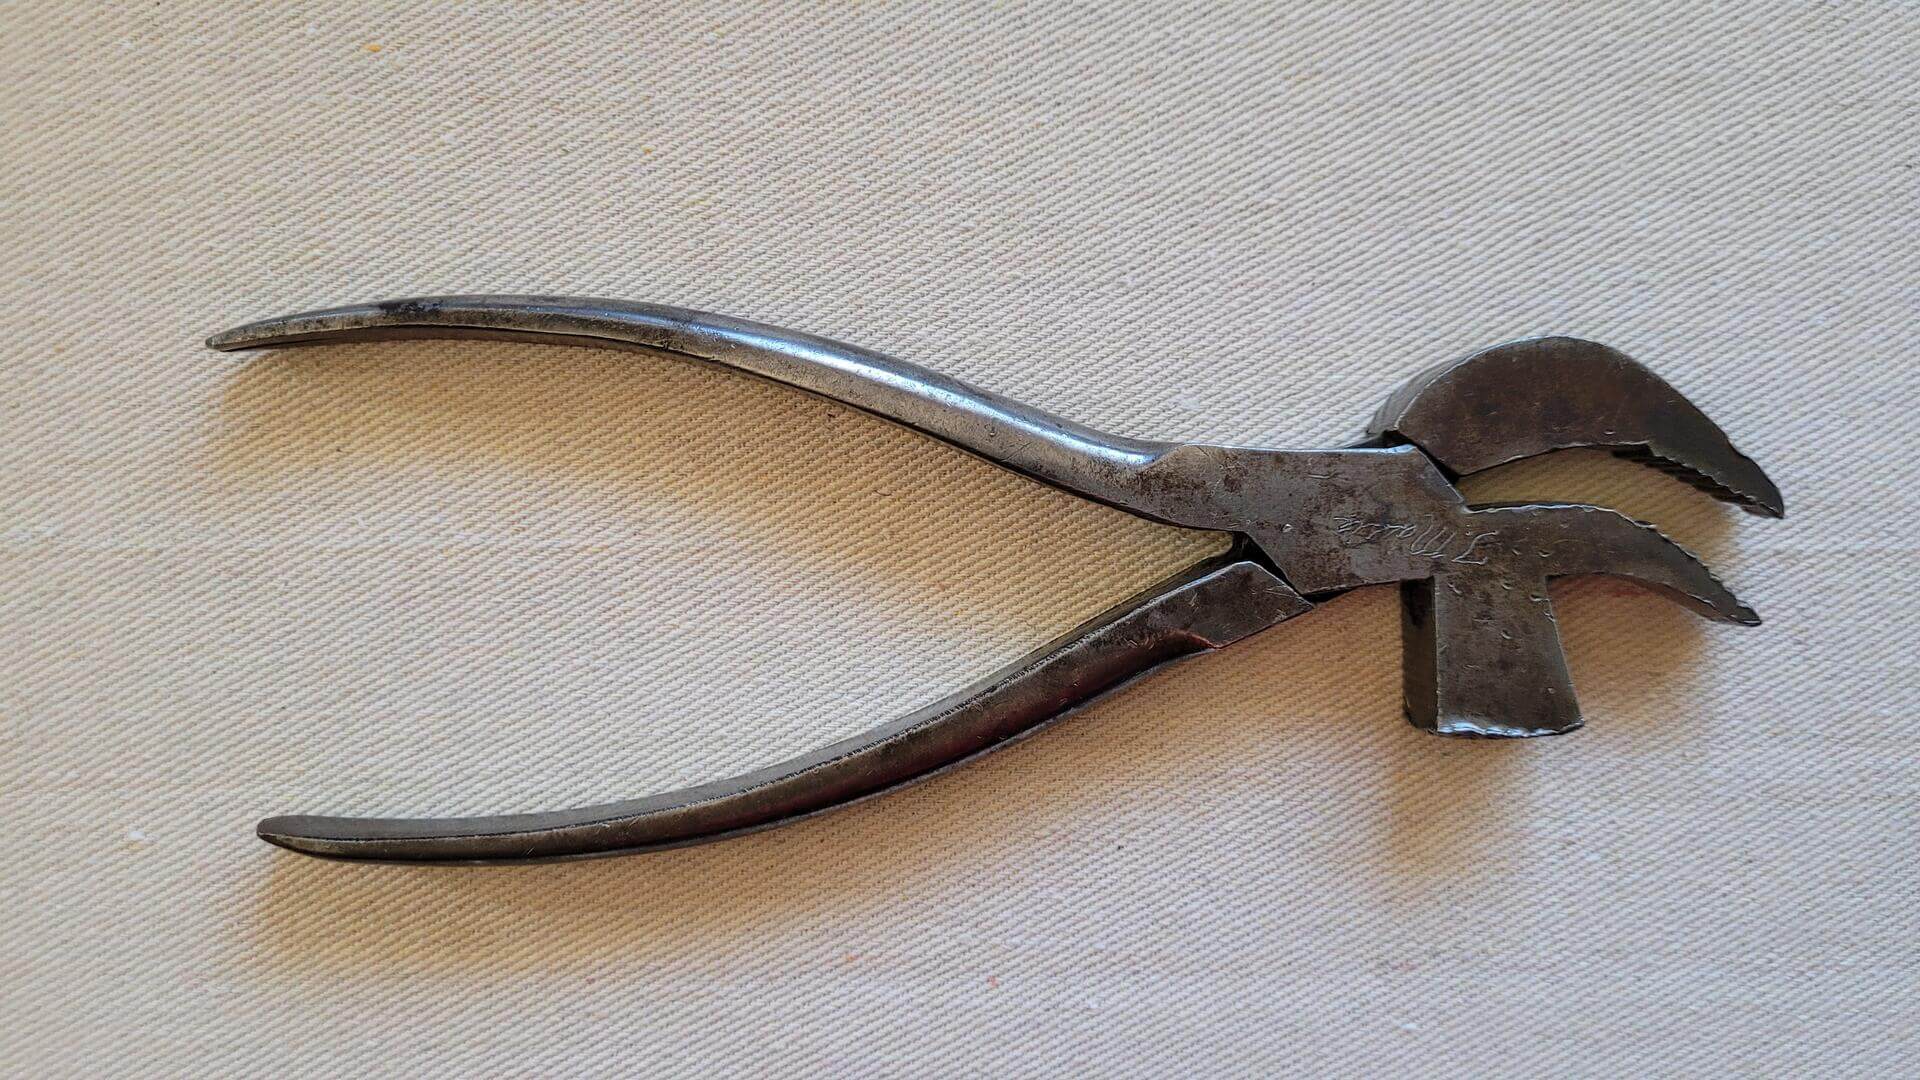 Rare vintage Carl Blombach forged cobbler lasting pliers with hammer 8 inches long. Primitive and antique made in Germany collectible shoe maker leather working hand tool